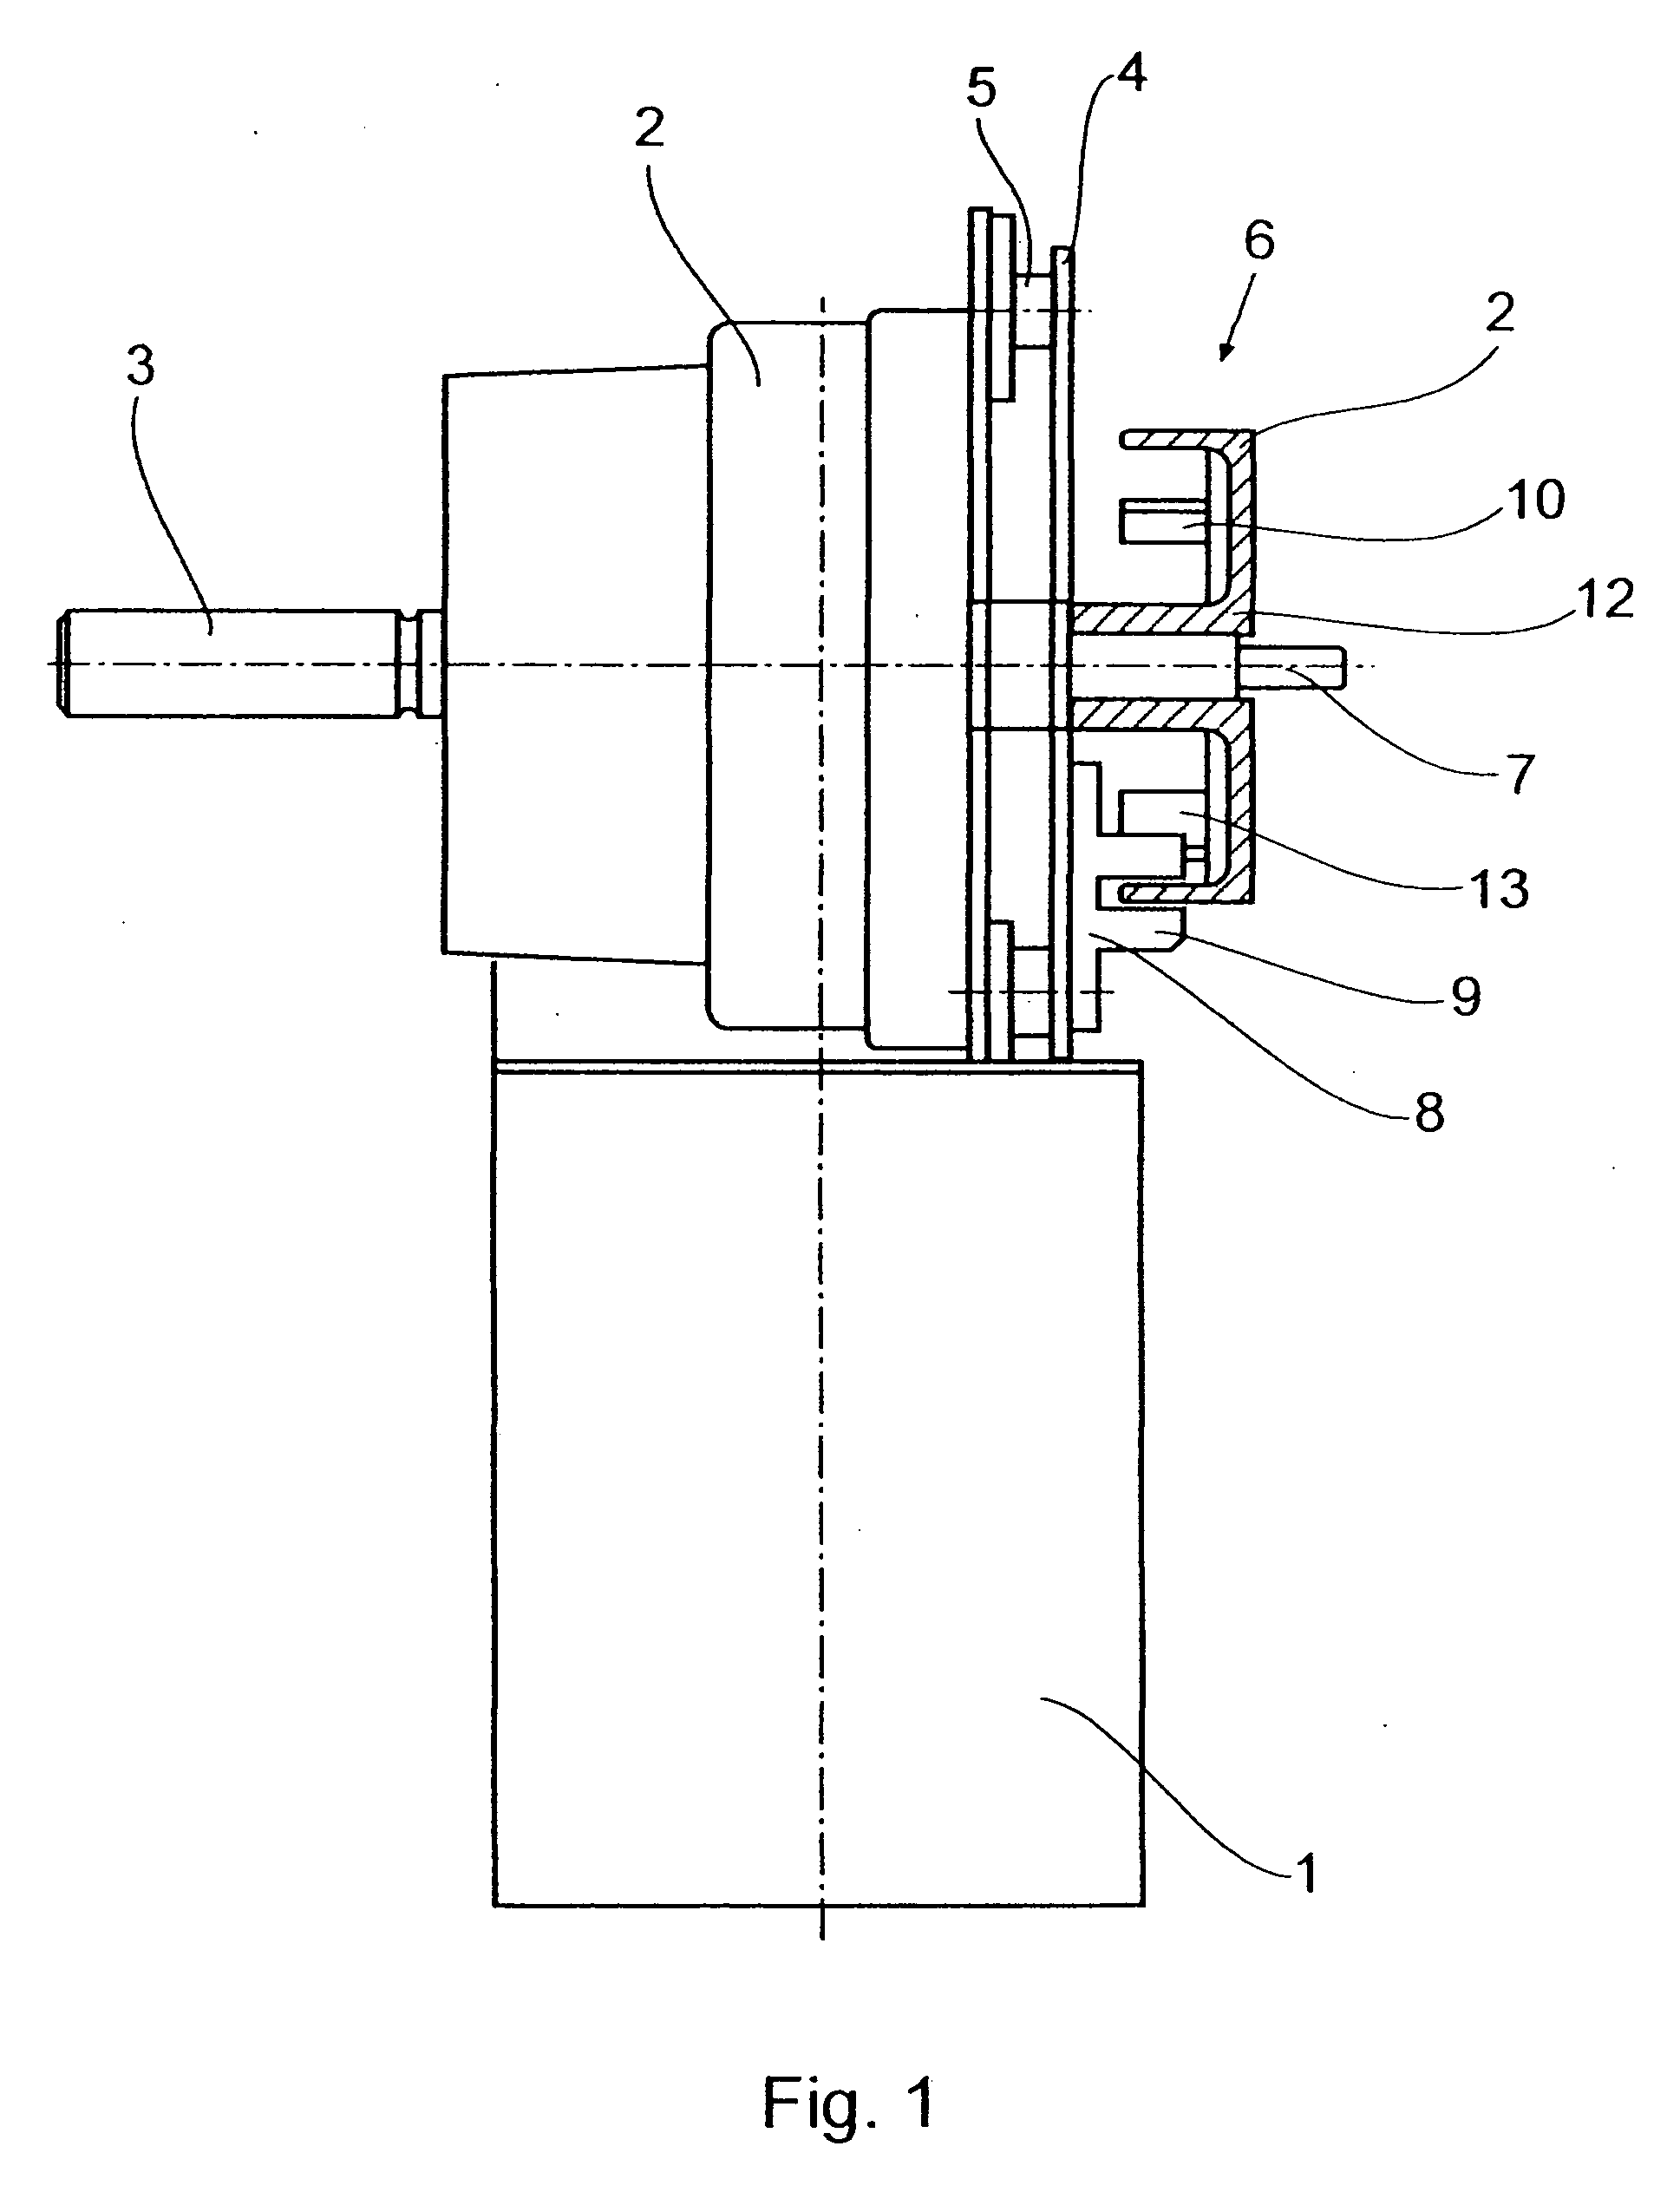 Drive unit for a door or gate, particularly for a garage door, and method for operating such drive unit